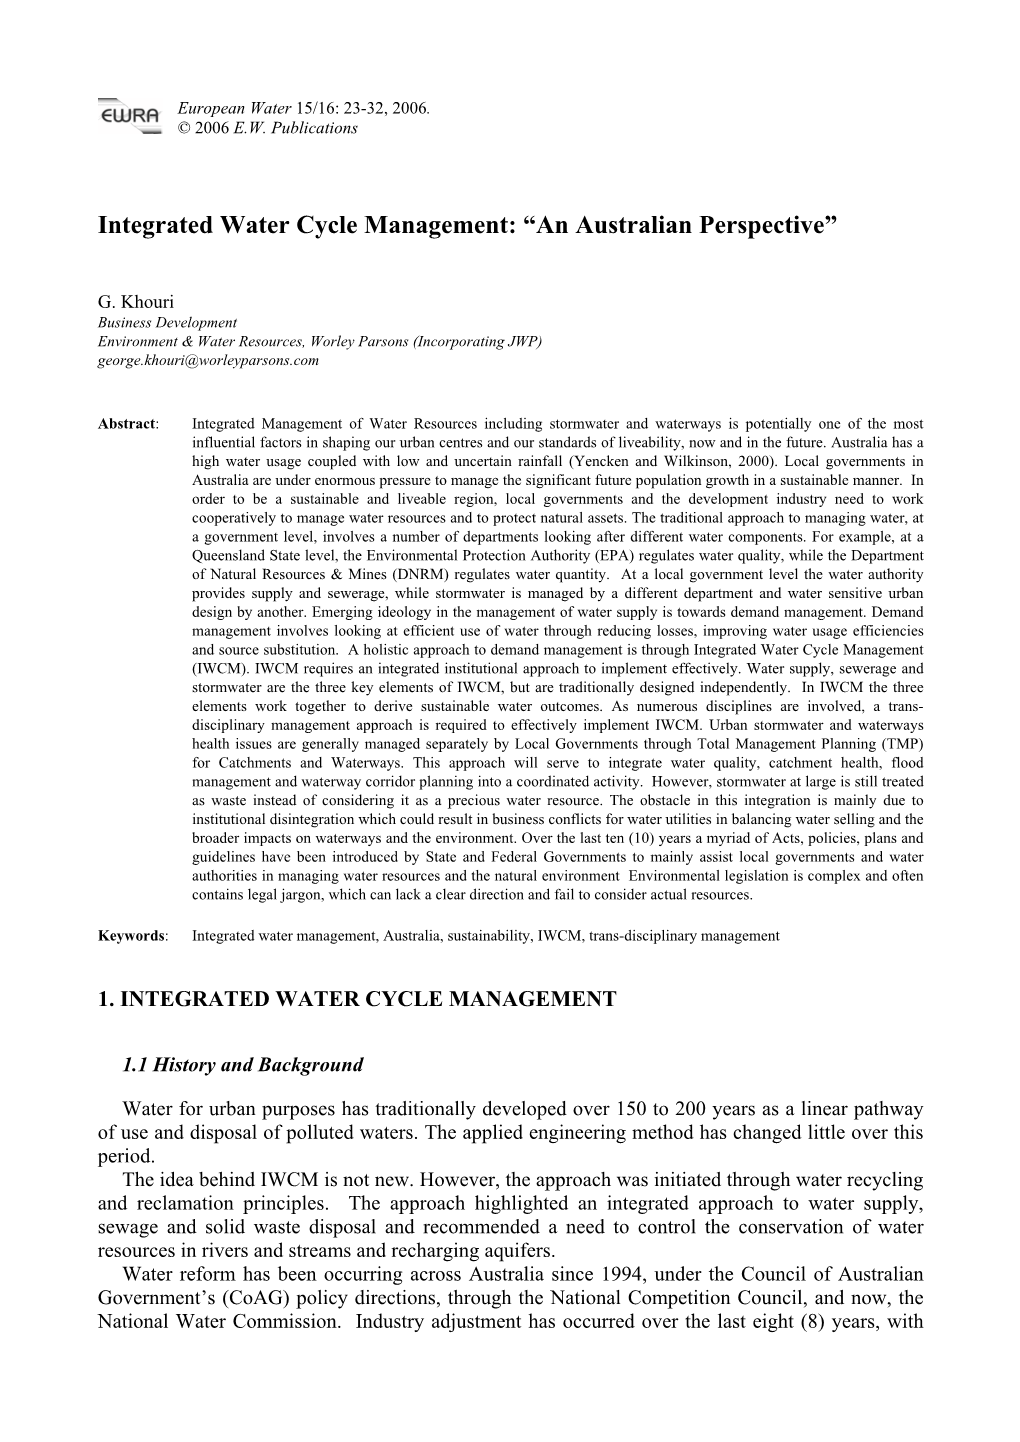 Integrated Water Cycle Management: “An Australian Perspective”